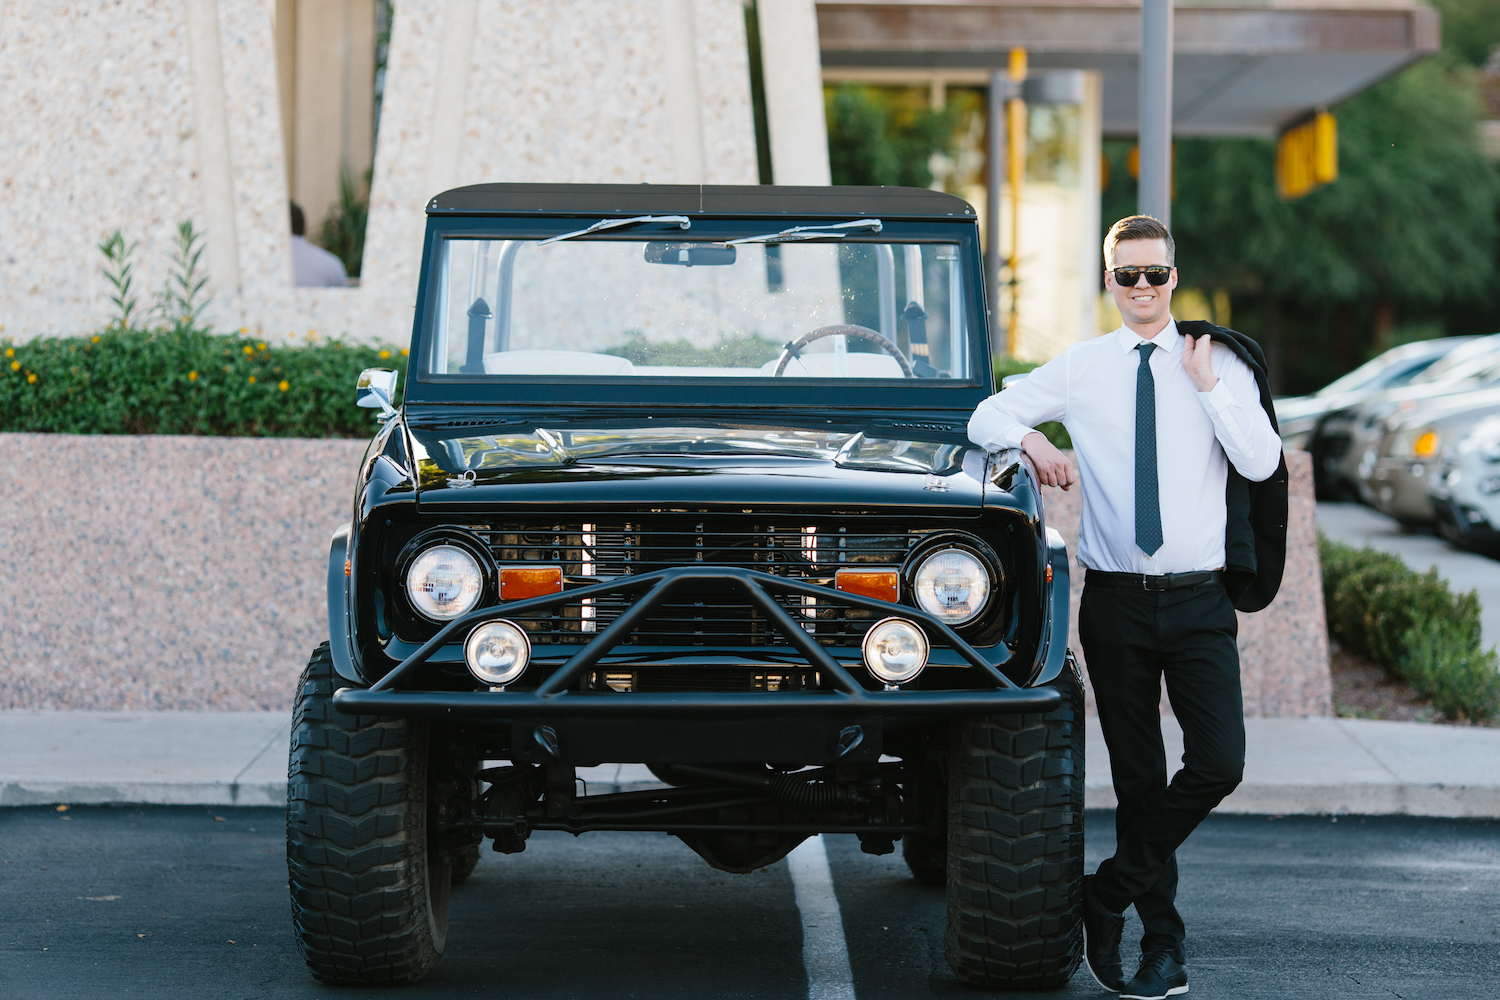 A man in a suit stands next to a black Ford Bronco